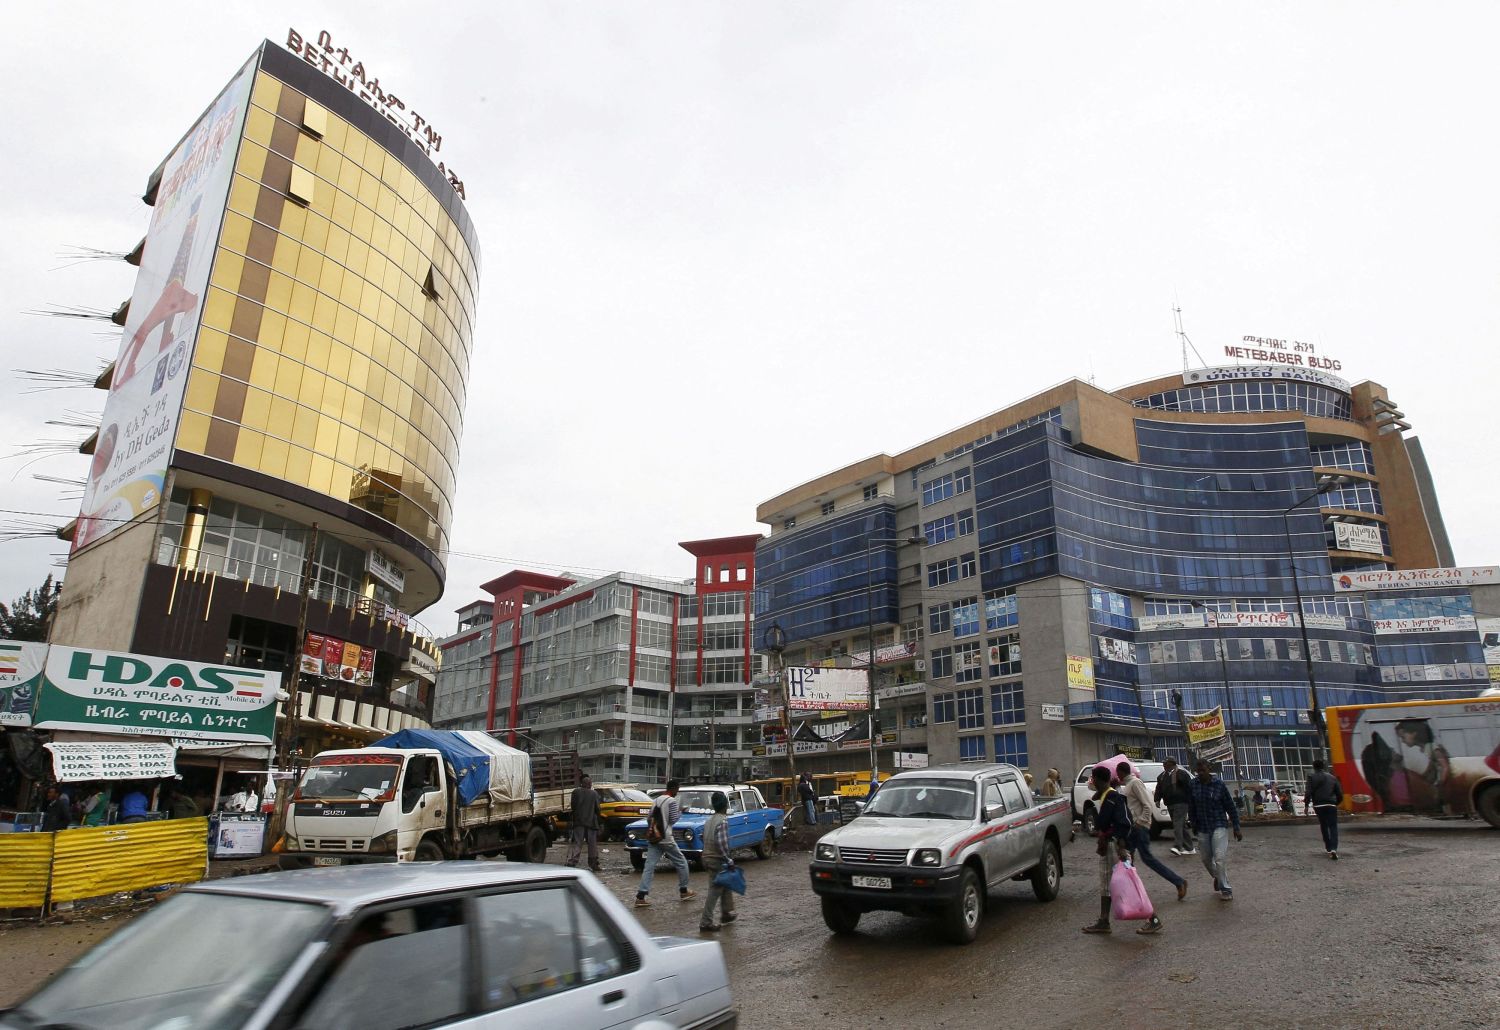 FILE PHOTO: People walk through the streets of a shopping area in Addis Ababa May 26, 2014. REUTERS/Tiksa Negeri/File Photo